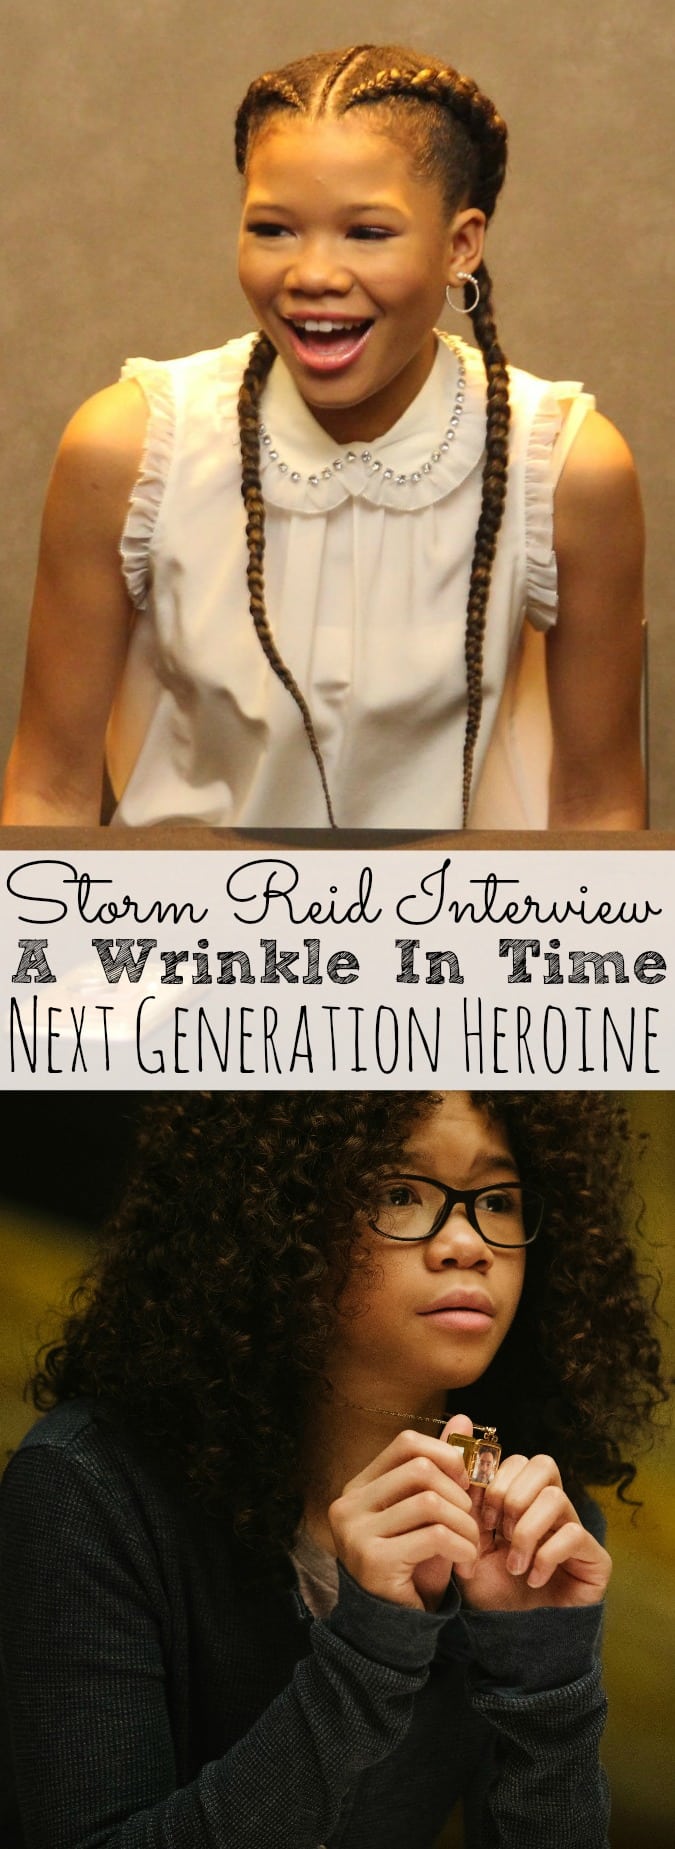 Storm Reid Interview A Wrinkle In Time | Next Generation Heroine